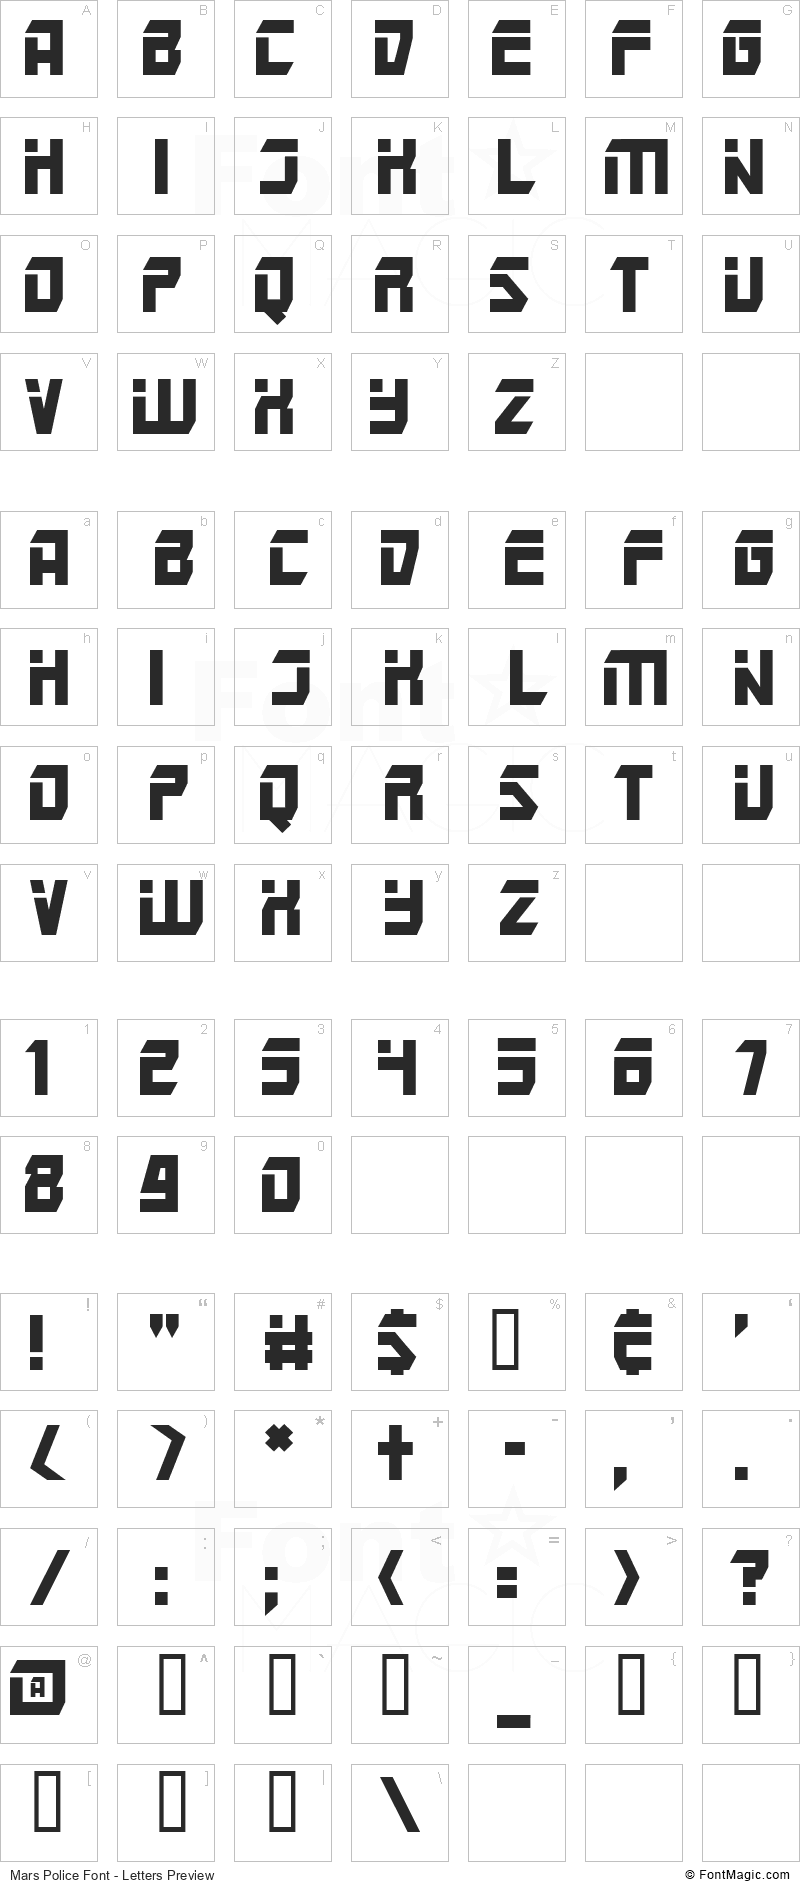 Mars Police Font - All Latters Preview Chart